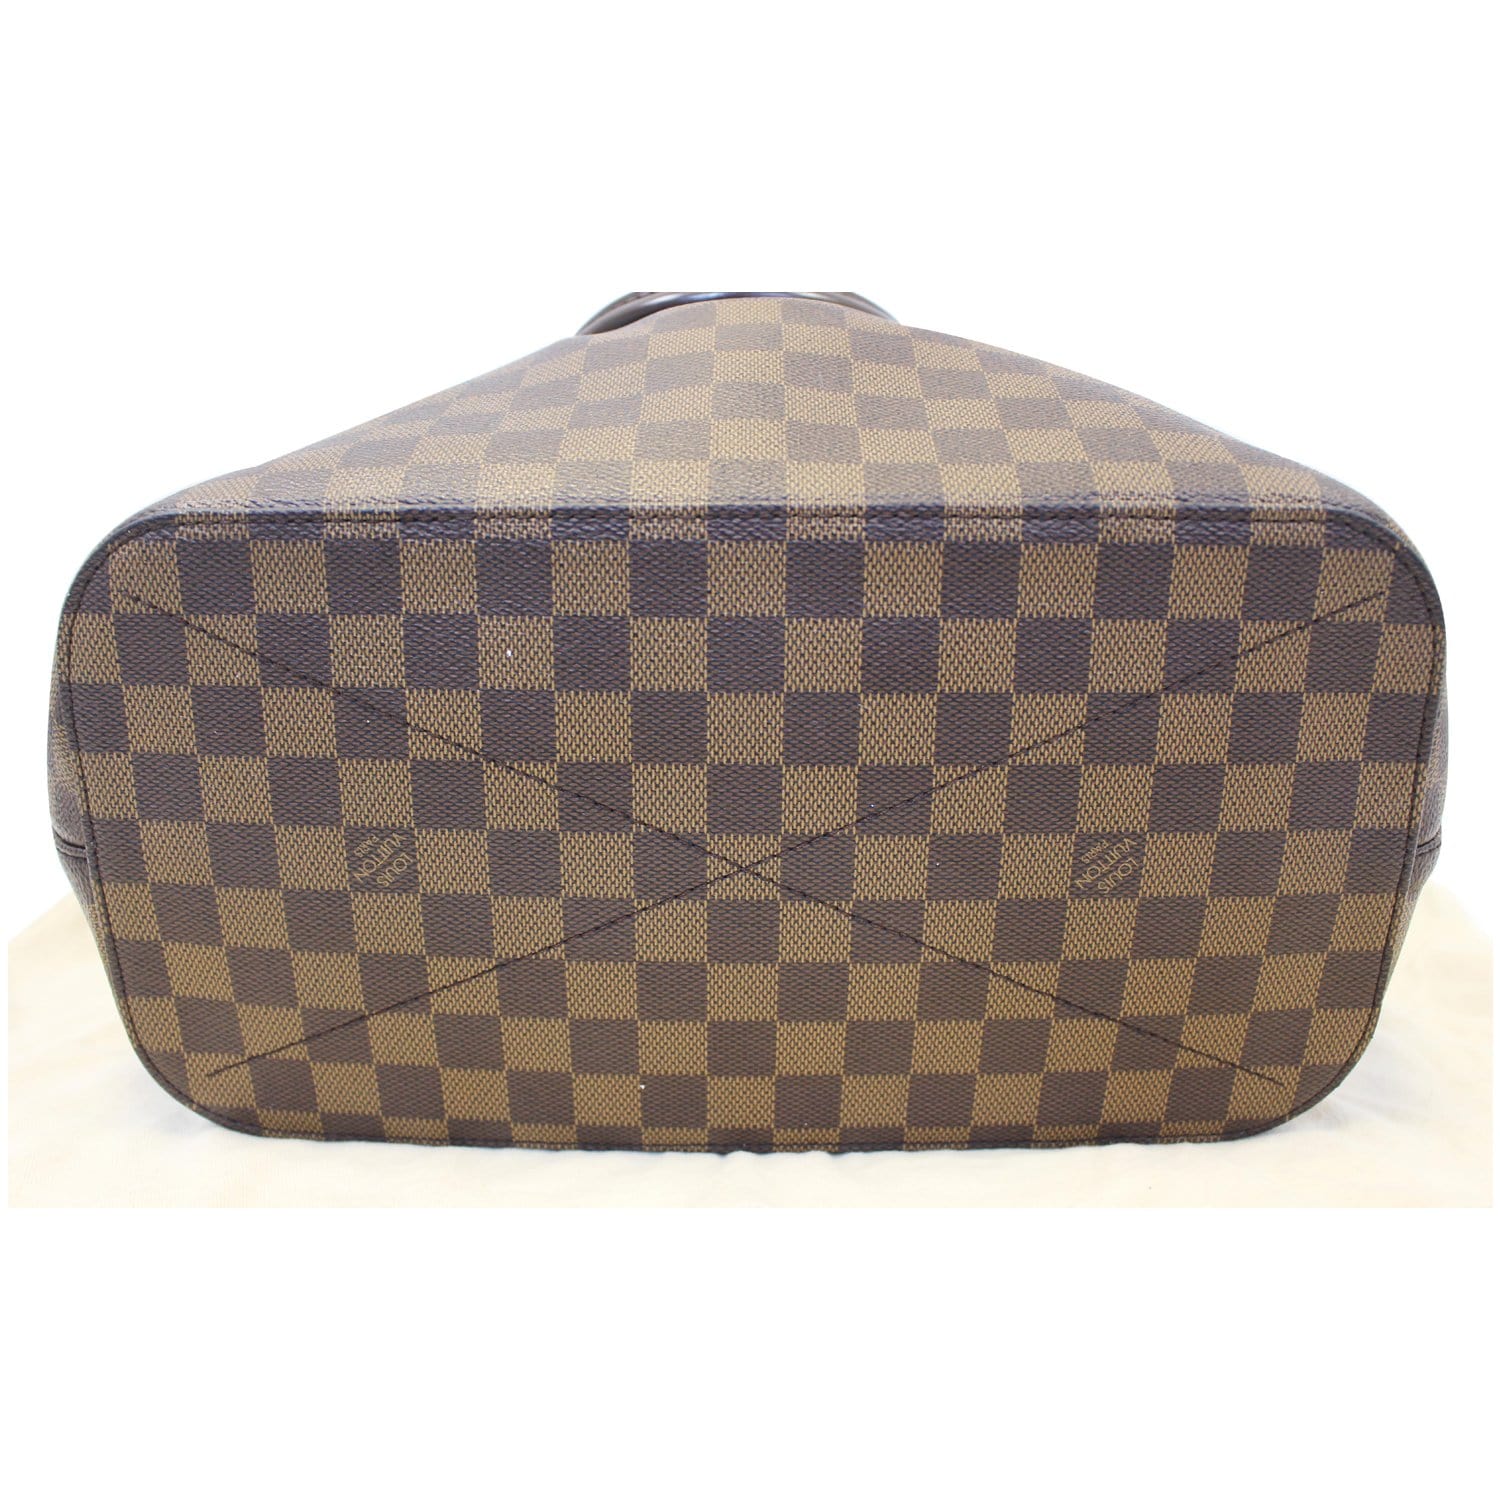 Authentic Louis Vuitton Siena GM for Sale in Fairfield, CA - OfferUp